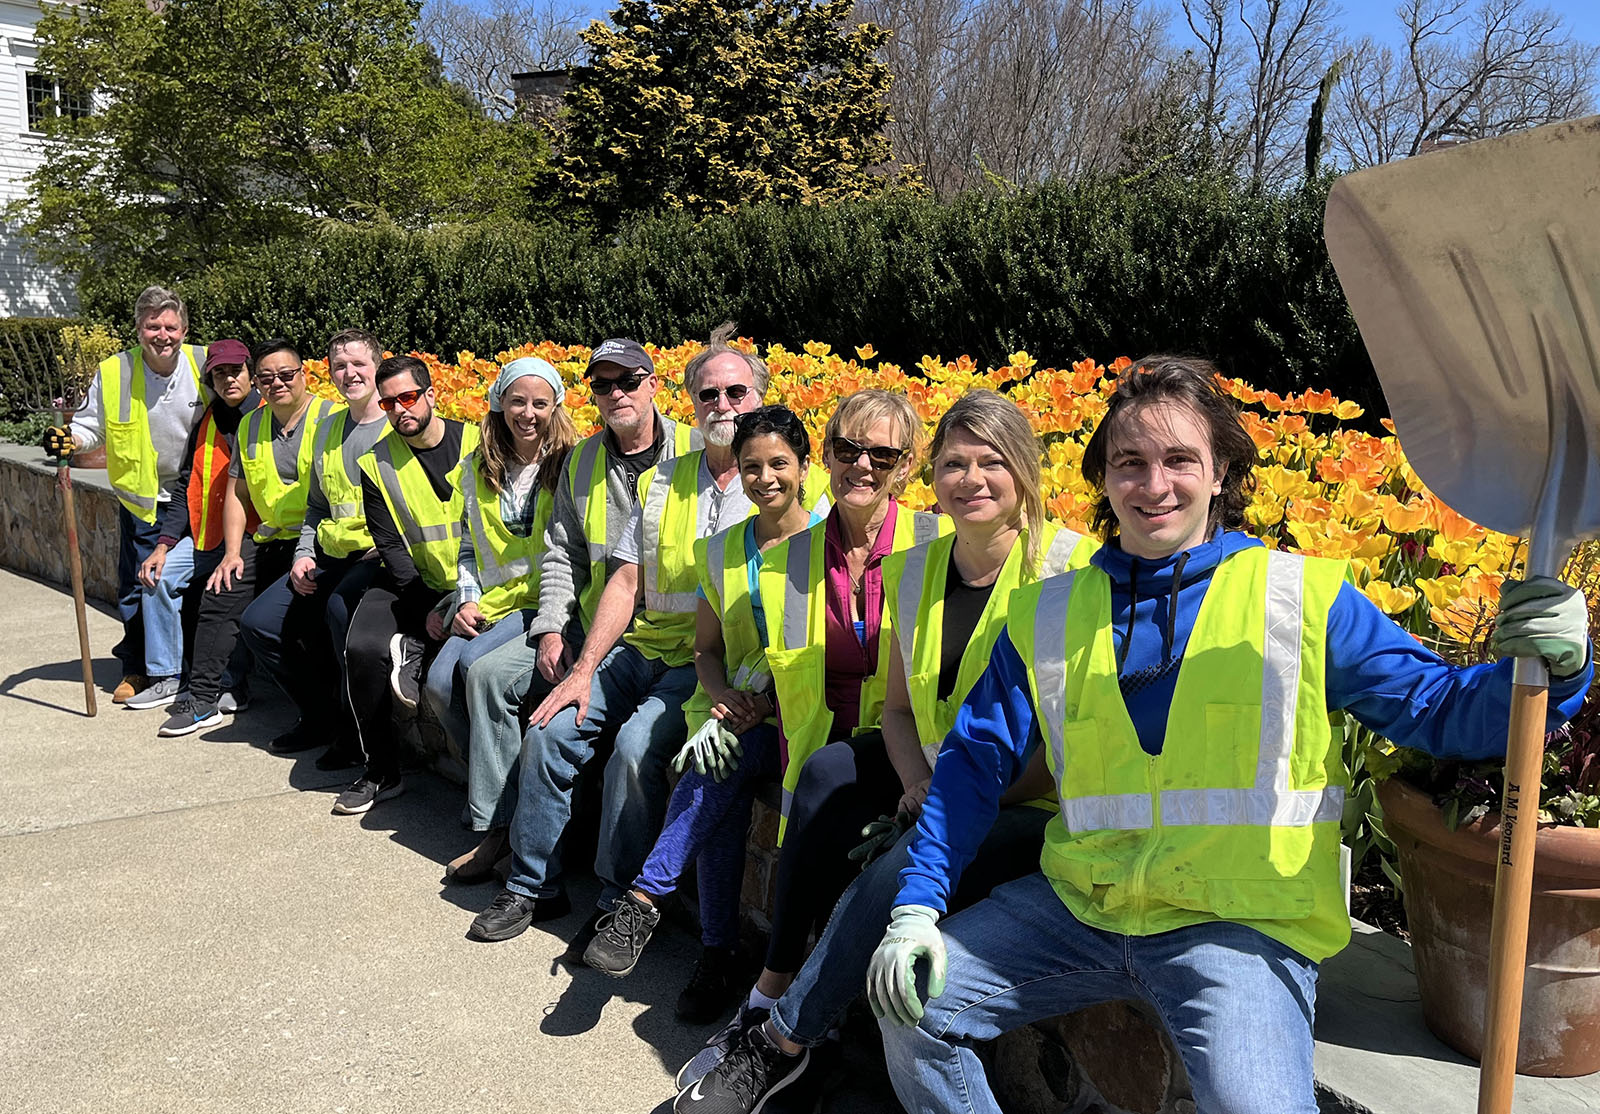 Members of our NJ office volunteering their services at the Frelinghuysen Arboretum in Morristown on Earth Day